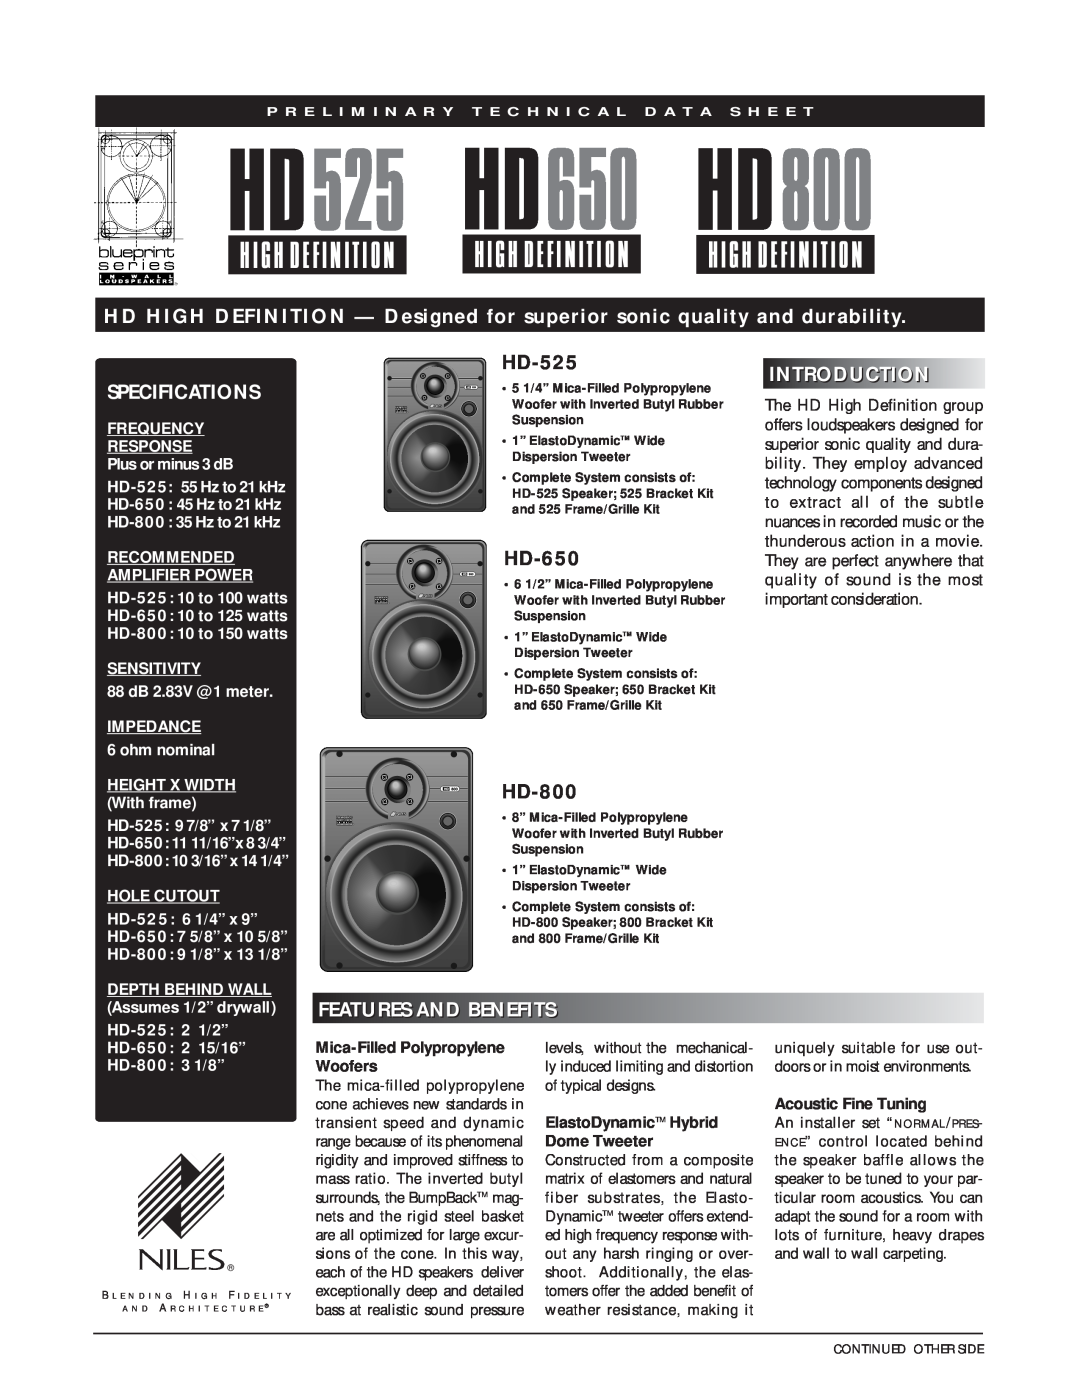 Niles Audio HD-800: 35 Hz to 21 kHz specifications Specifications, Introduction, Featuresandbenefits, HD525 HD650 HD800 